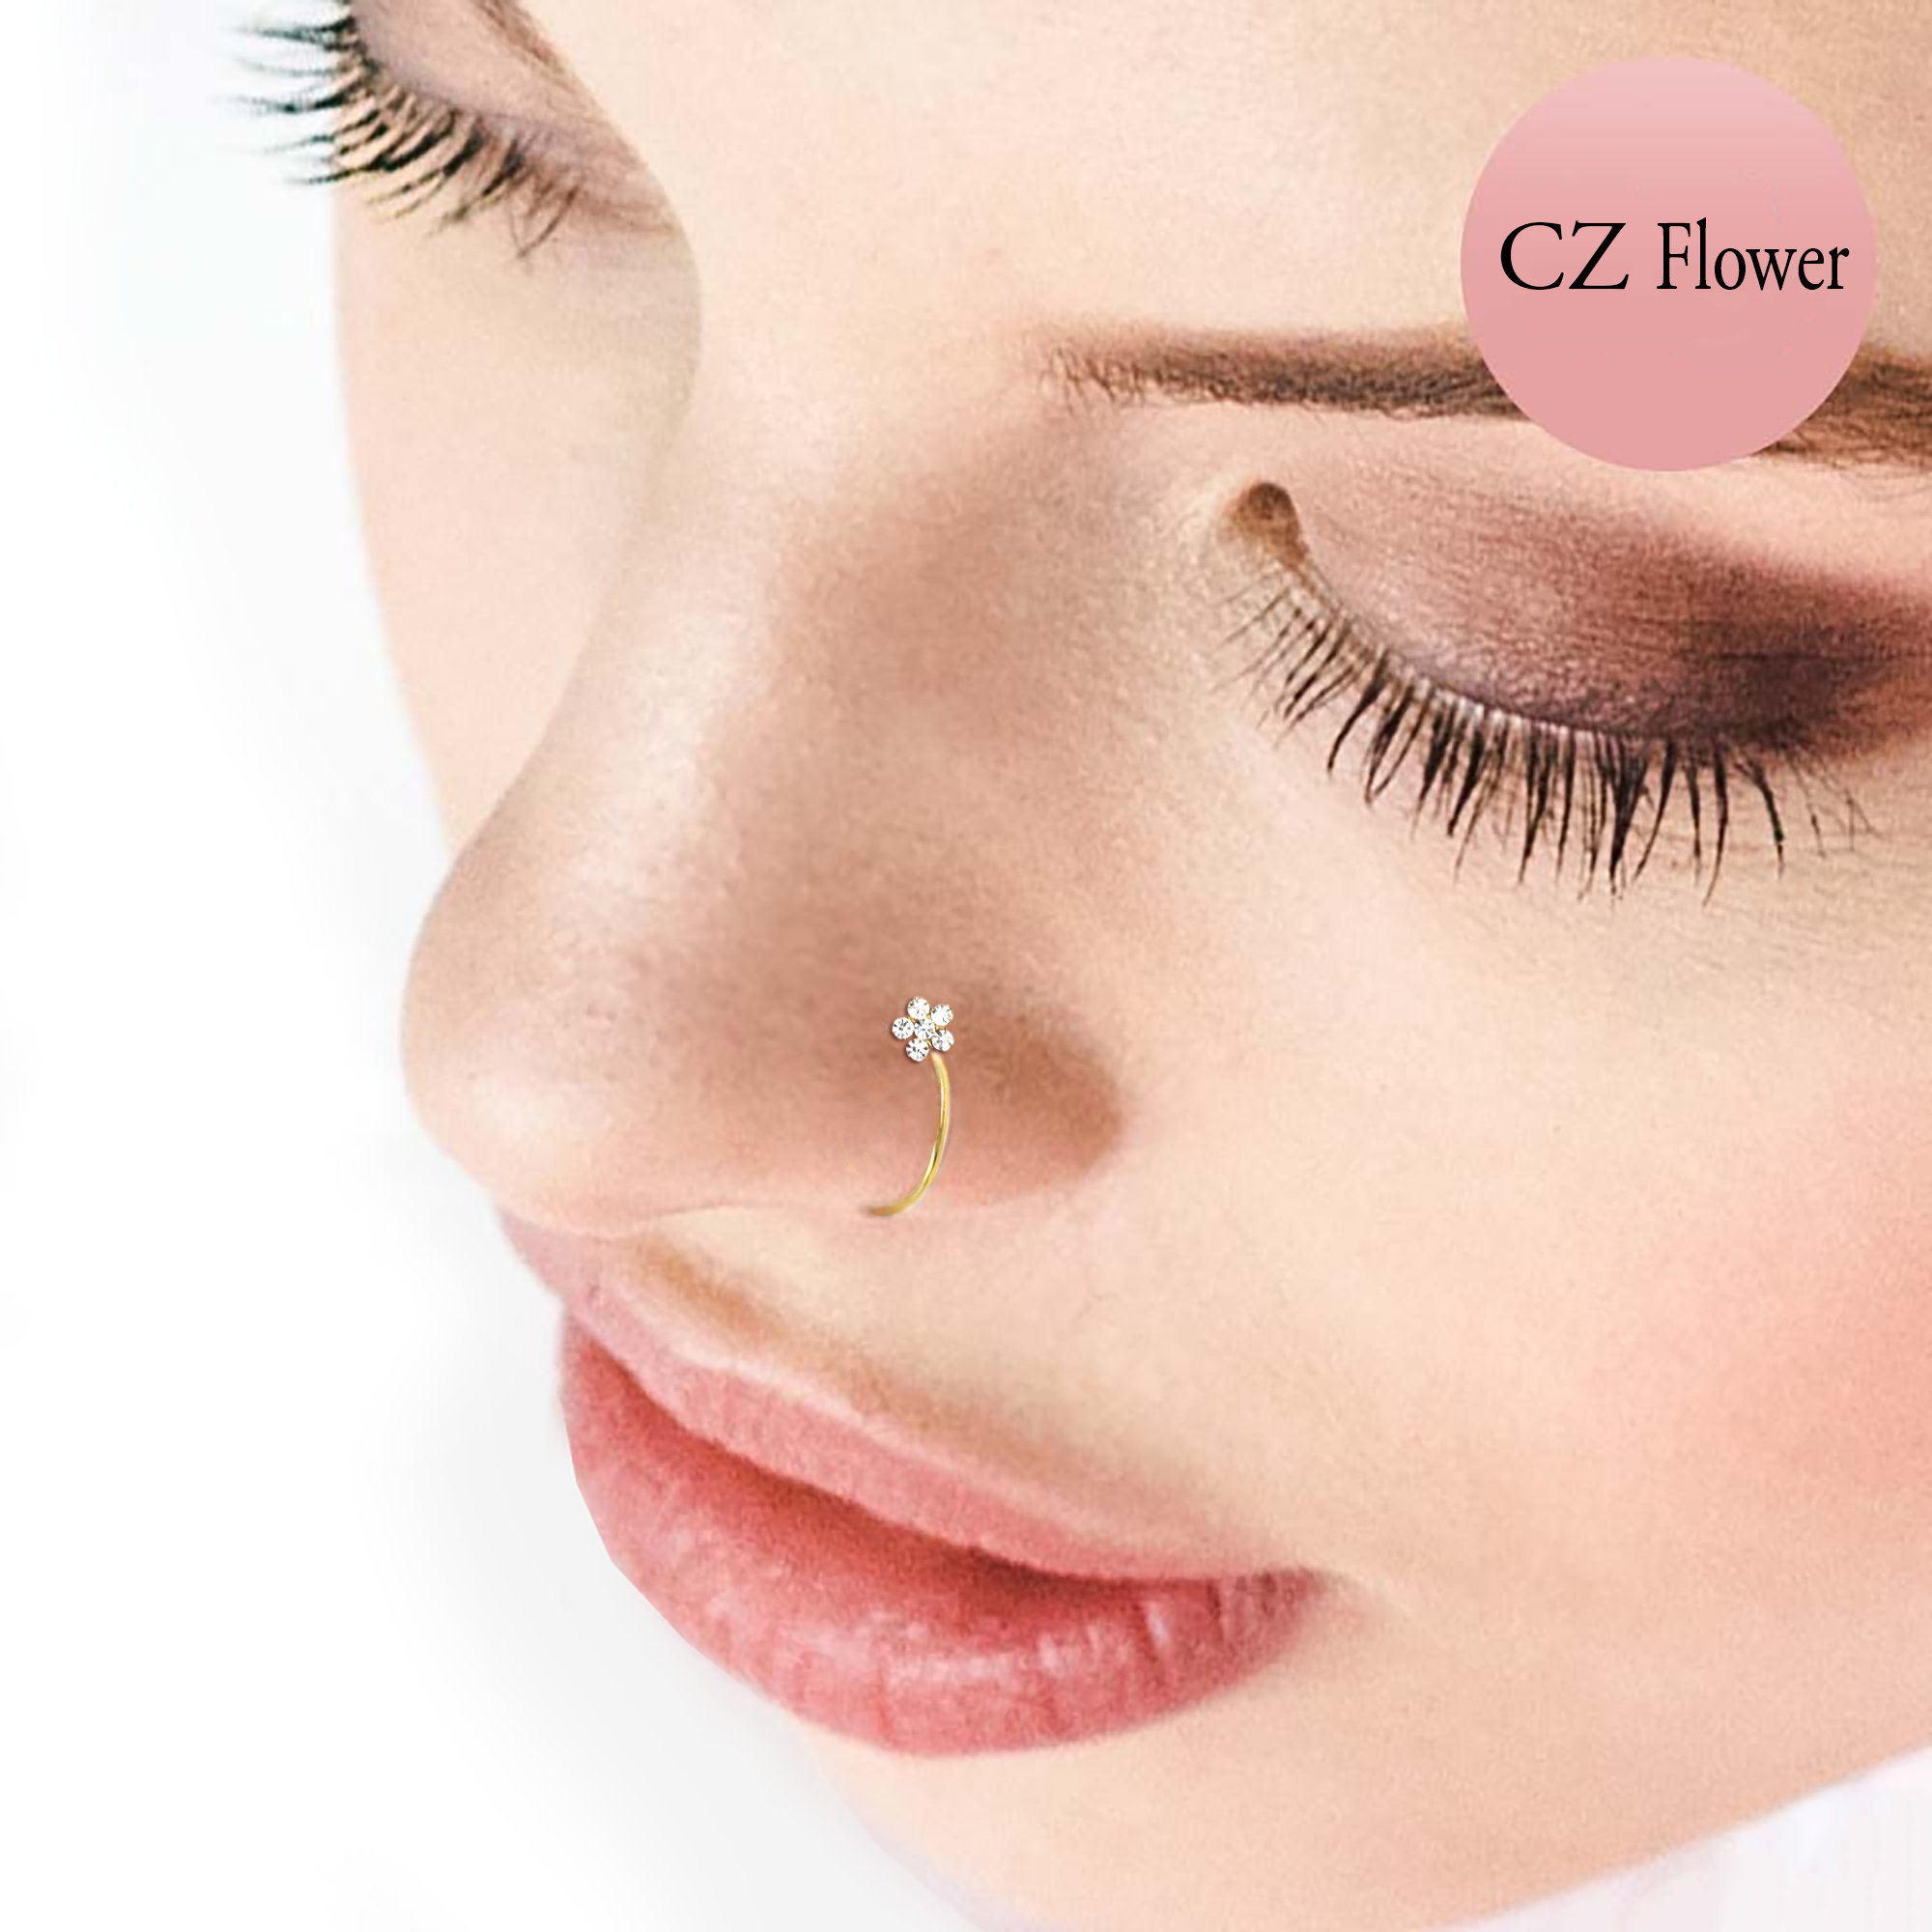 9PCS Fake Nose Ring Hoop for Women Men CZ Flower Cartilage Earrings Clip On  Nose Ring Nose Cuff Non Piercing